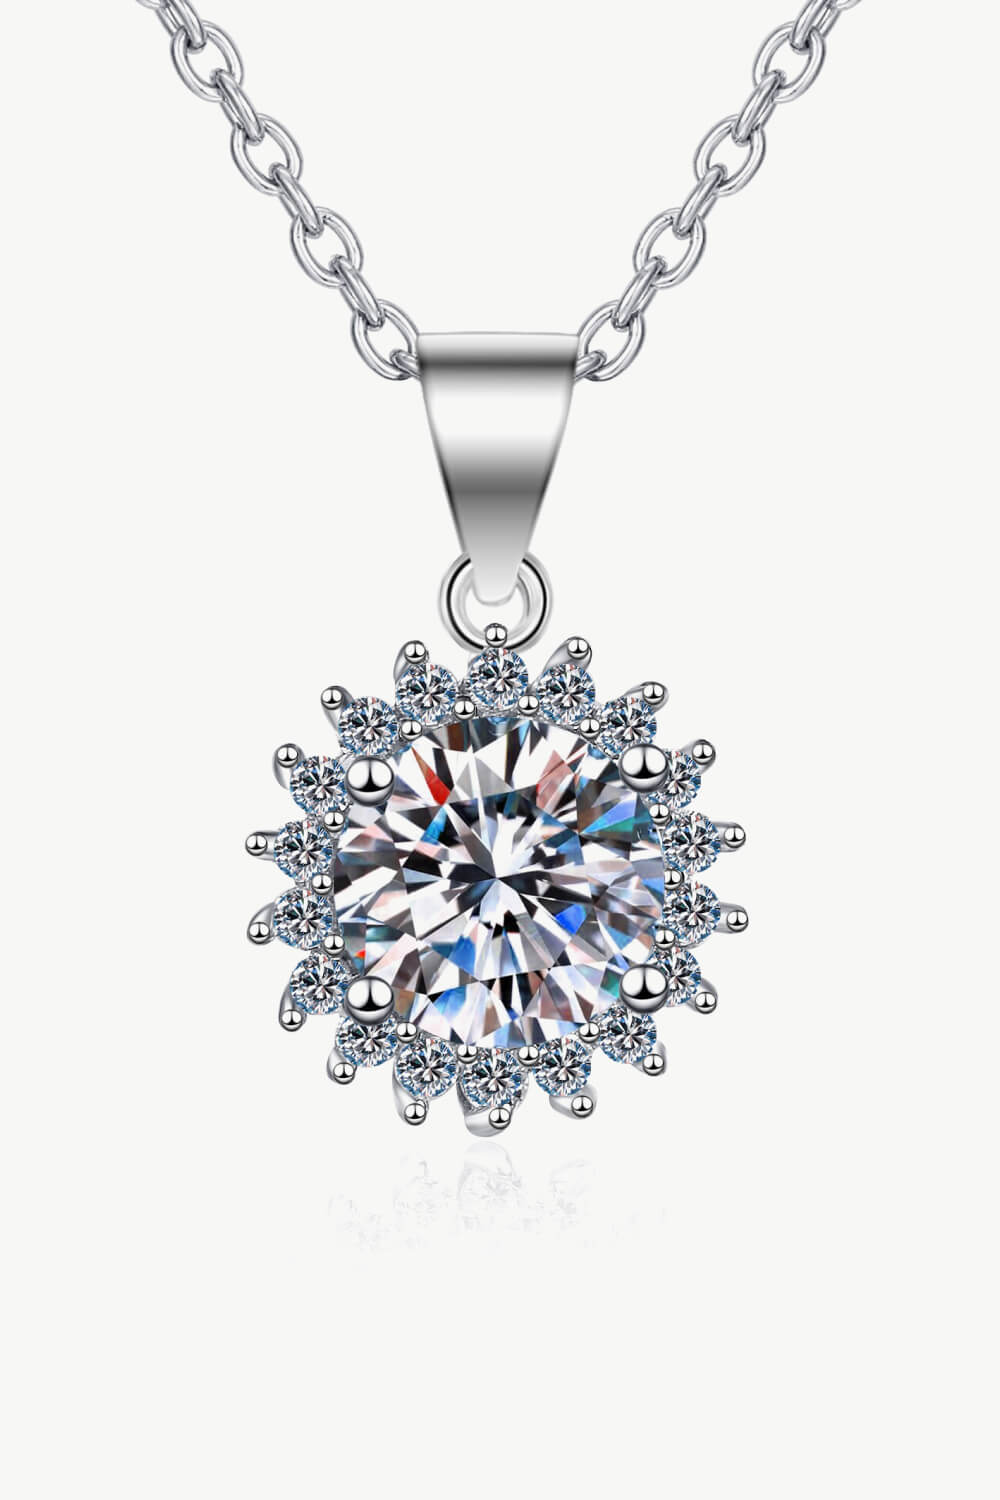 925 Sterling Silver Moissanite Pendant Necklace - Necklaces - FITGGINS